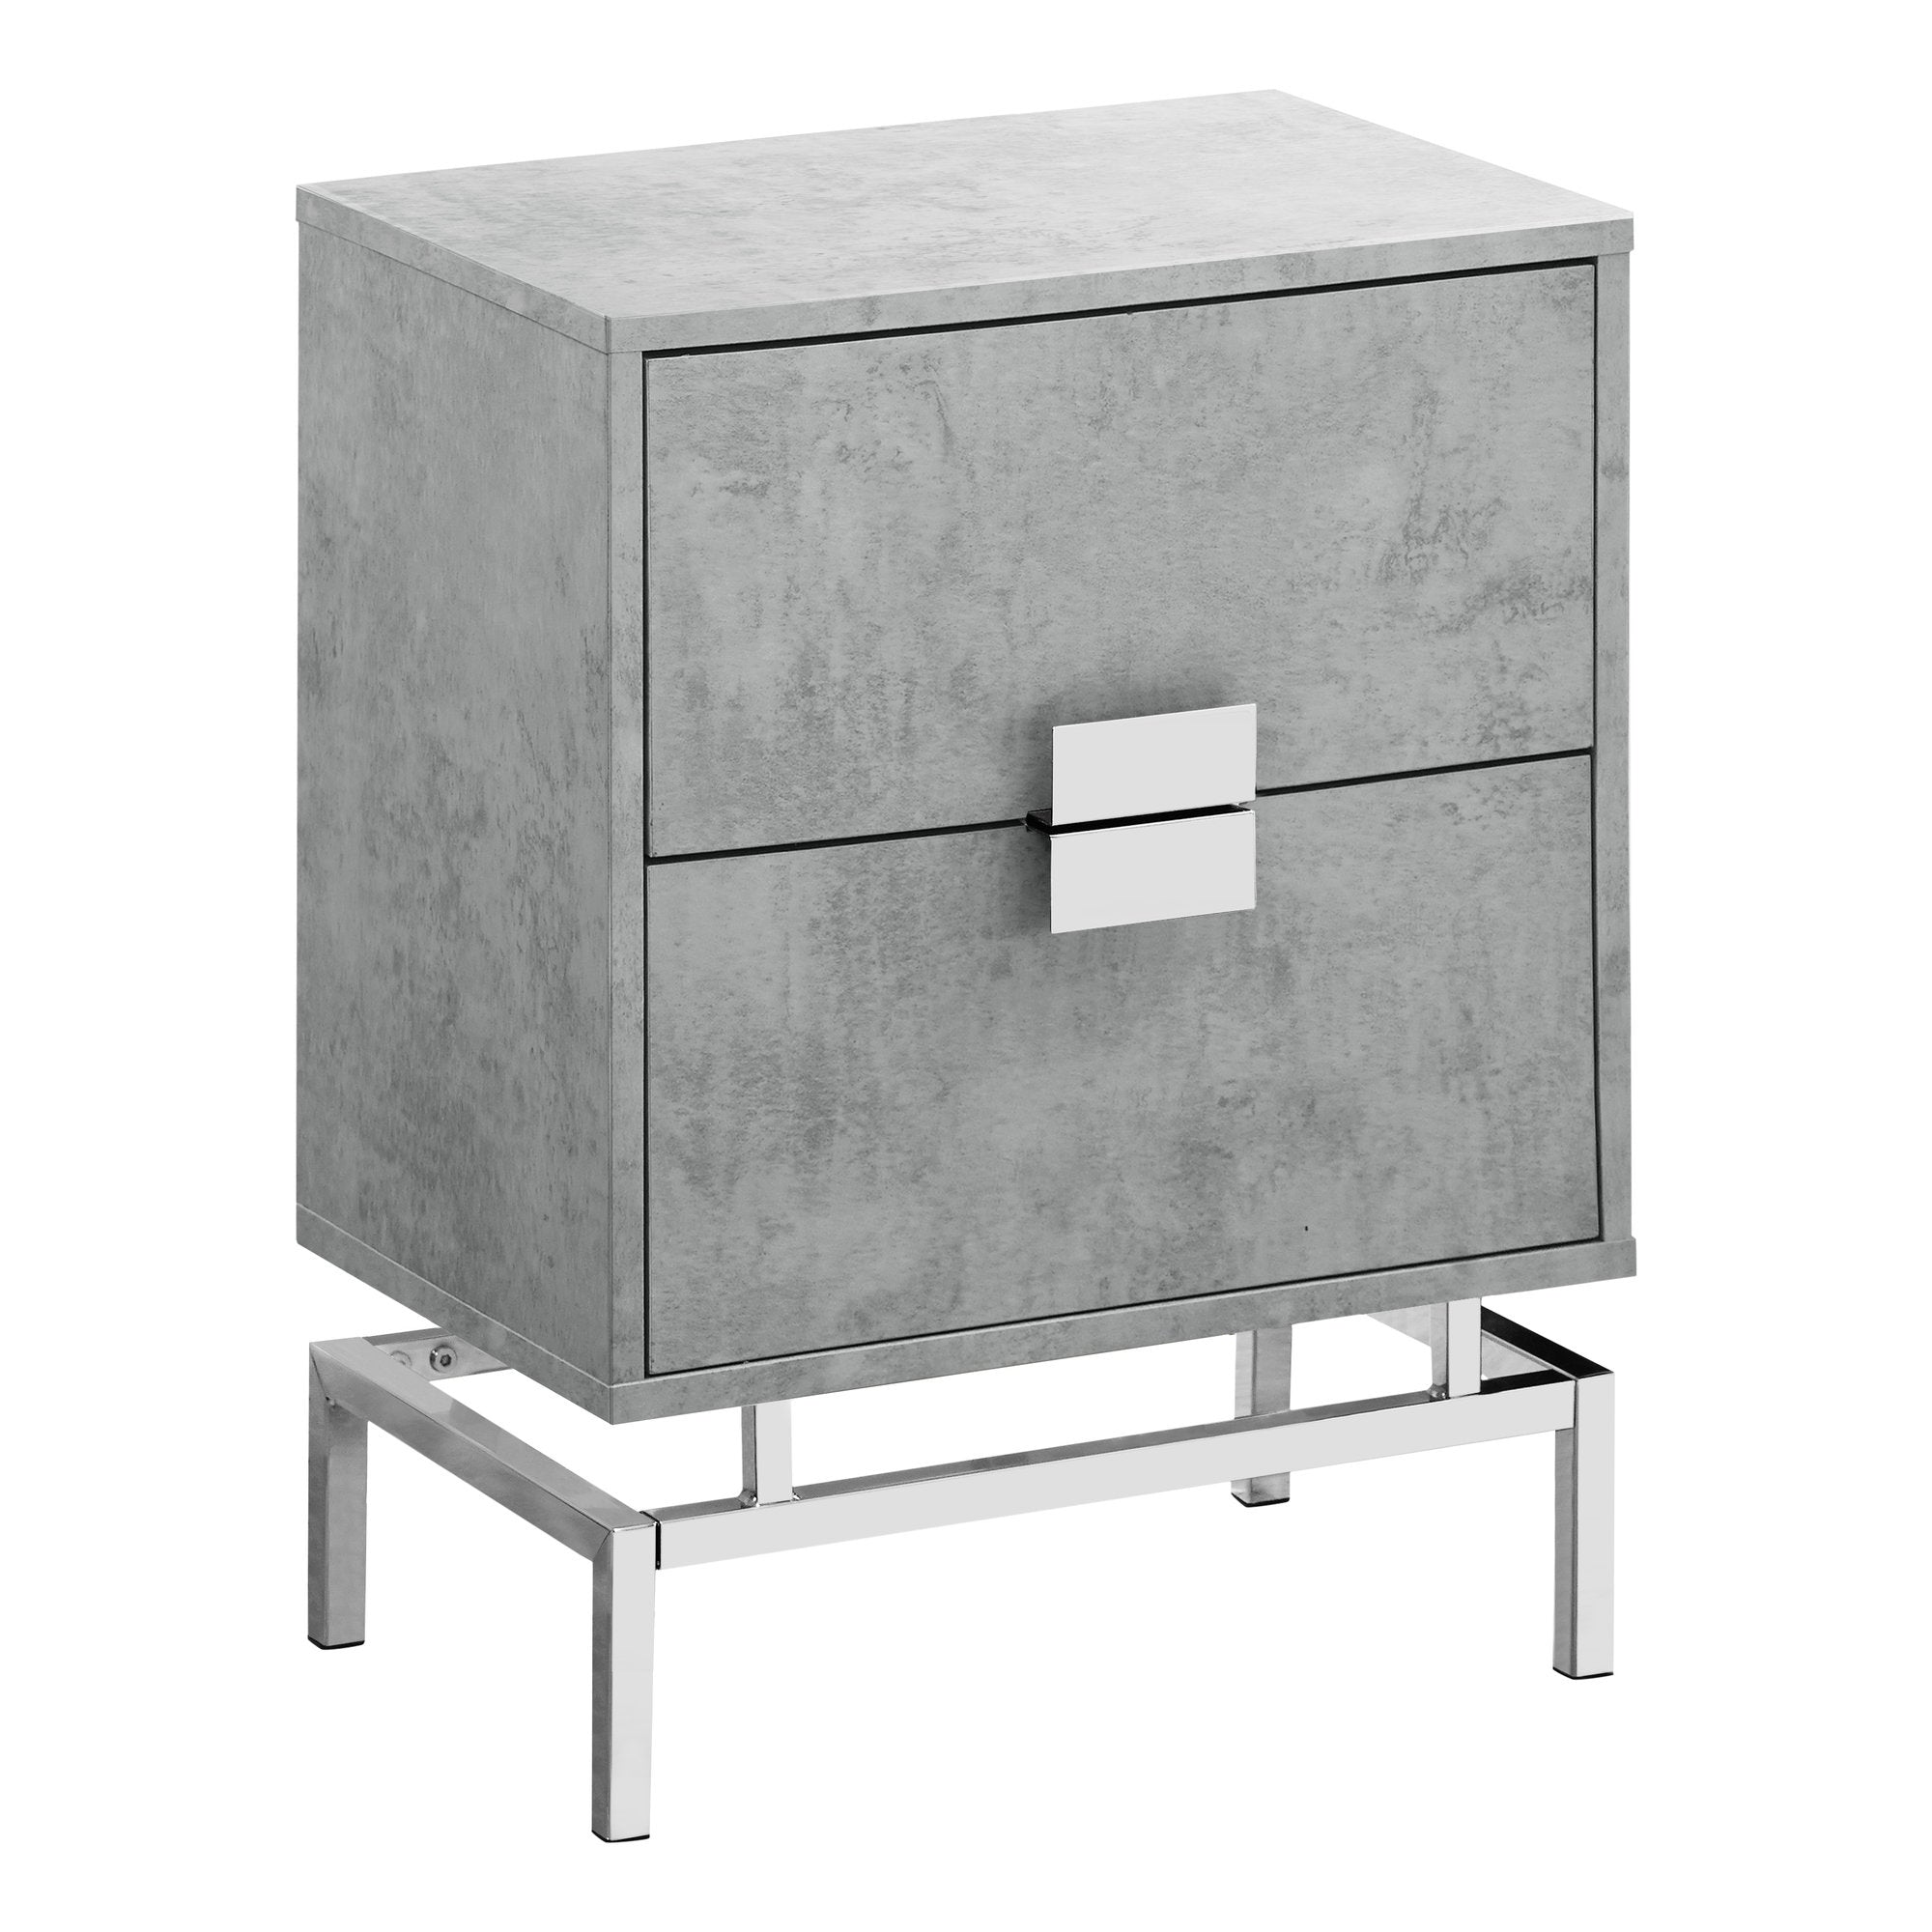 MN-943491    Accent Table, Side, End, Nightstand, Lamp, Living Room, Bedroom, Metal Legs, Laminate, Grey Cement Look, Chrome, Contemporary, Modern